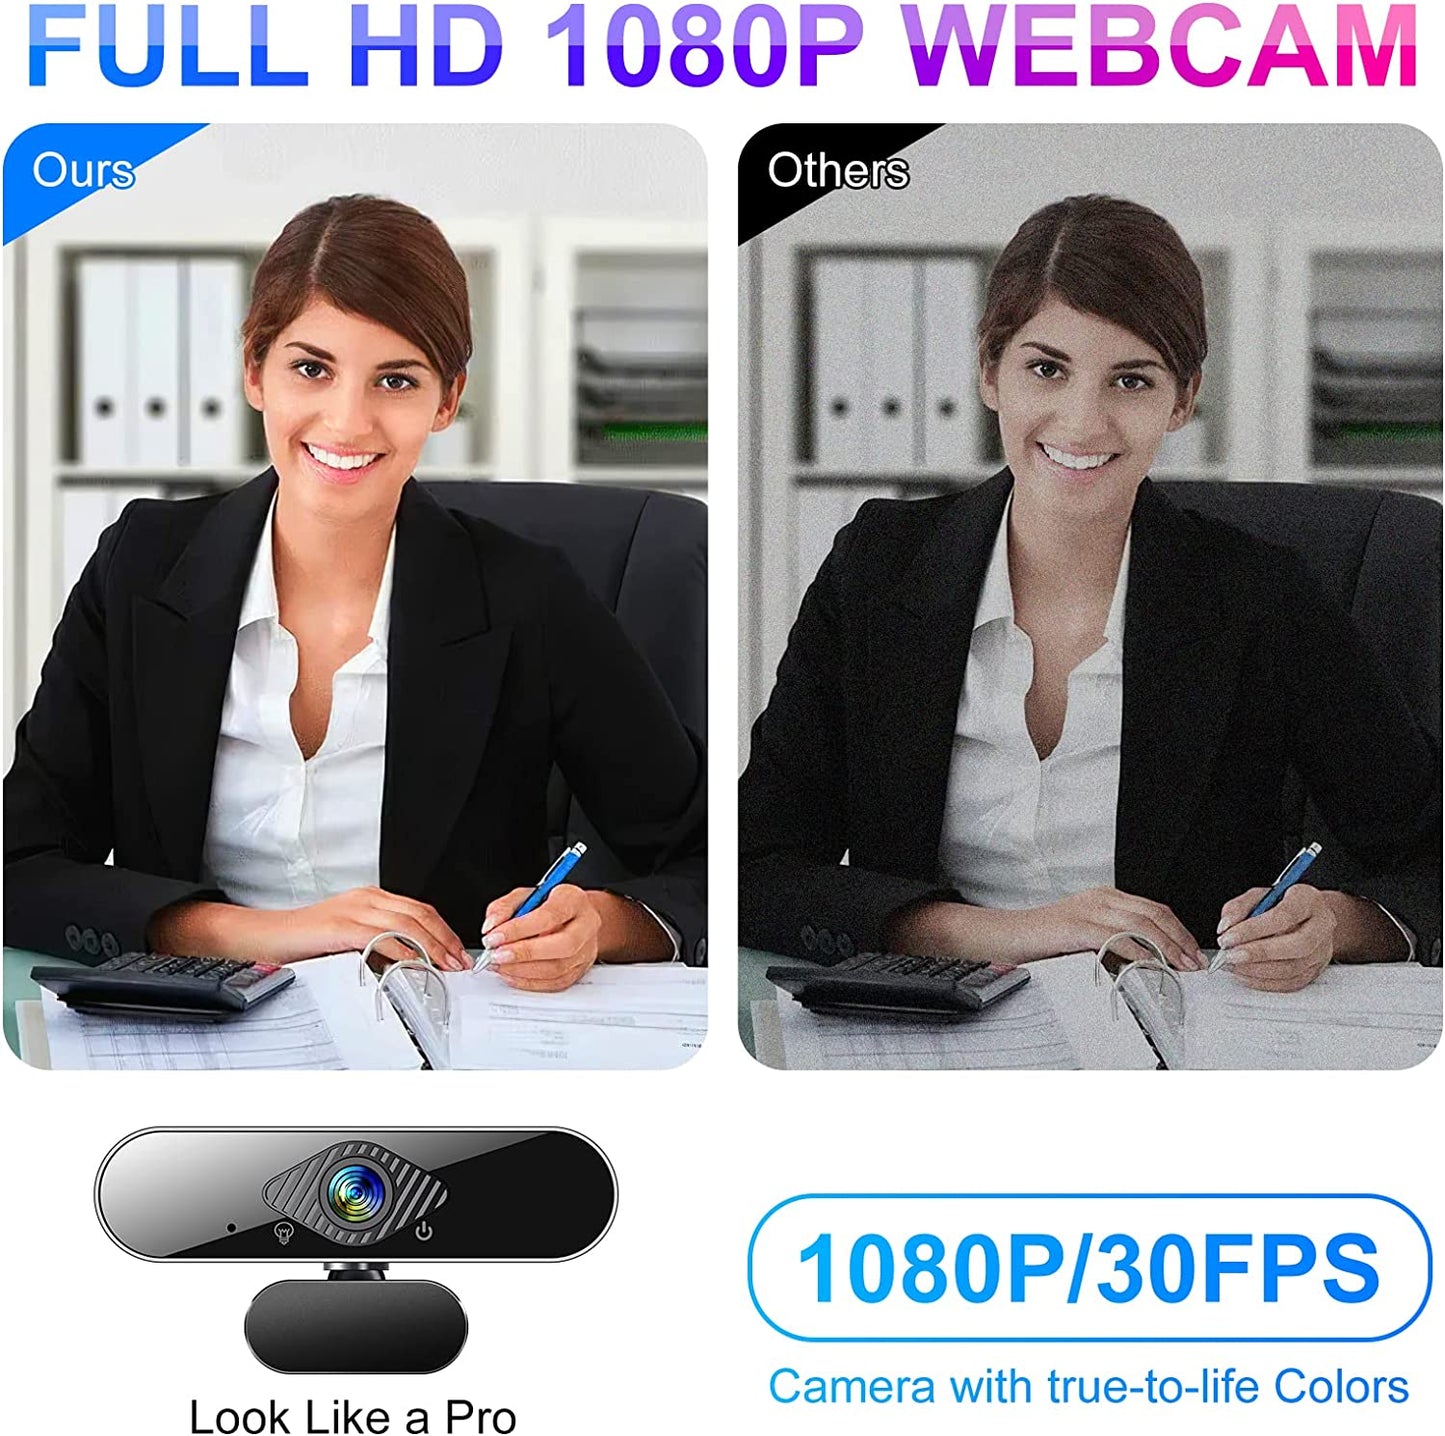 1080P HD Webcam with Microphone, Computer USB Web Camera at 1080P/30fps, 100 Wide Angles View, Plug and Play, Works with Skype, Zoom, FaceTime, Hangouts, PC/Mac/Laptop/MacBook/Tablet by FUMAX